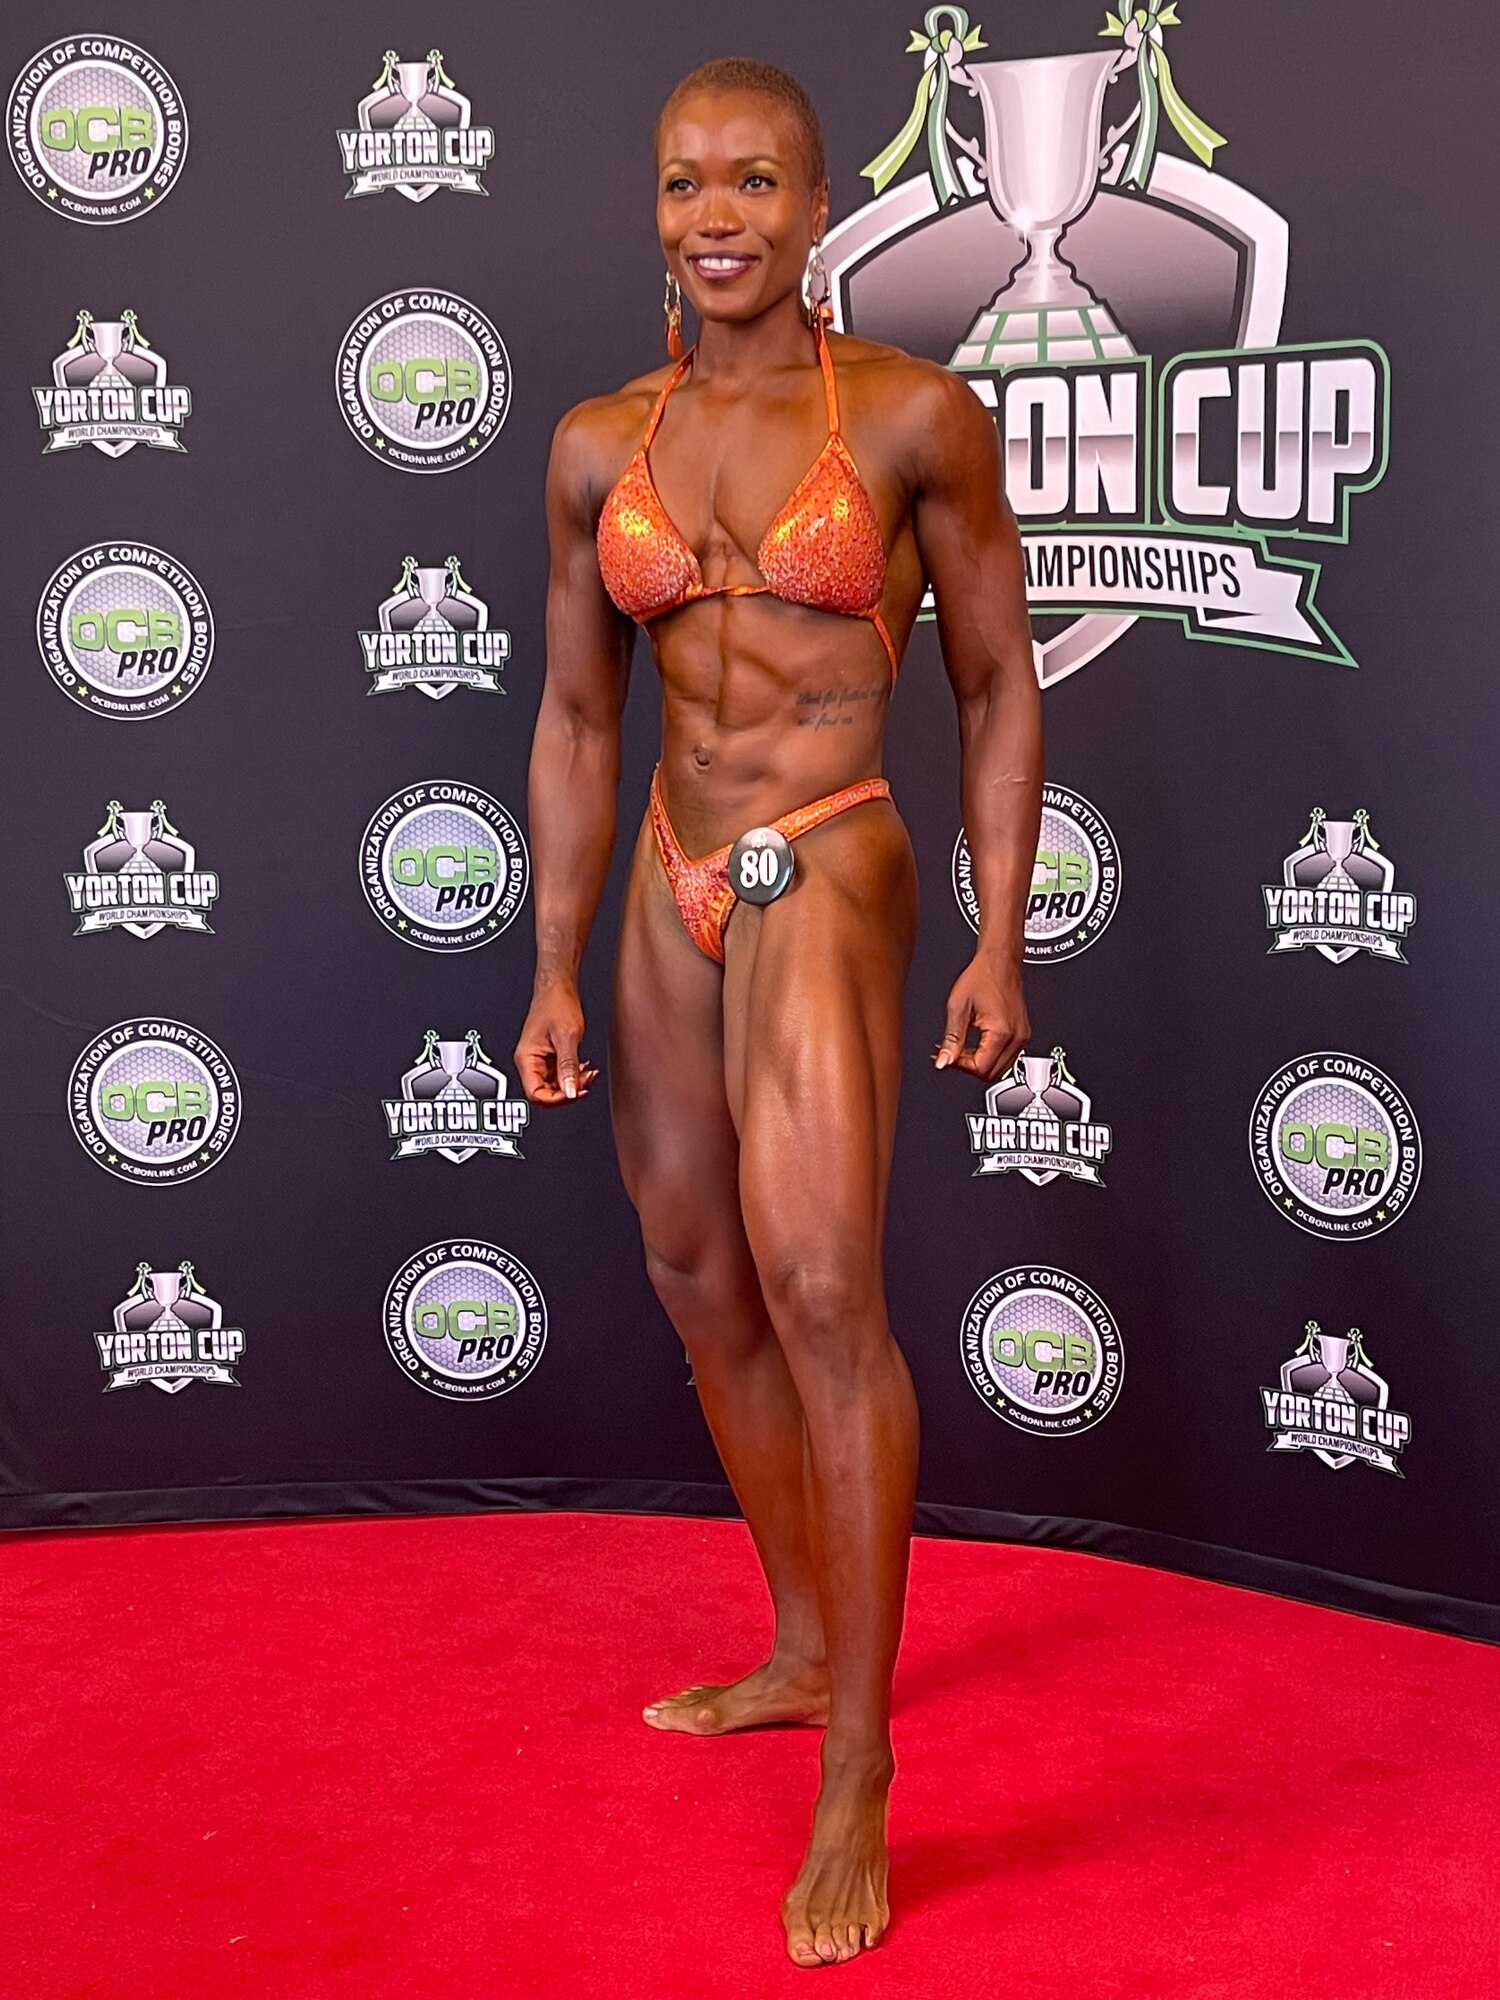 A photo of Danielle Todman posing for a photo at the Organization of Competitive Bodybuilders Yorton Cop World Championship.